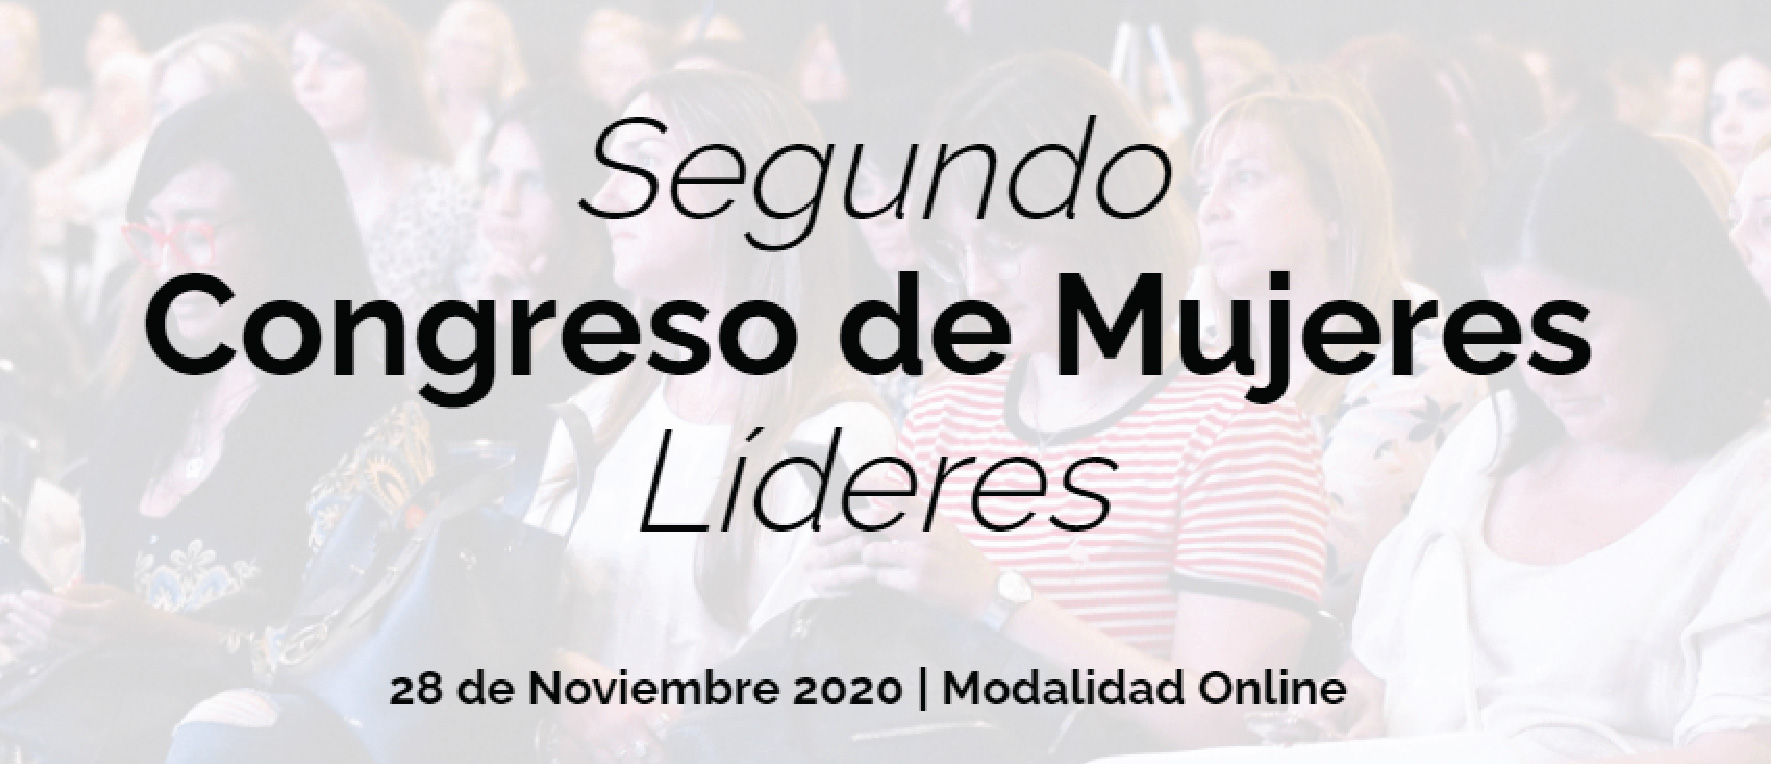 Mujeres lideres